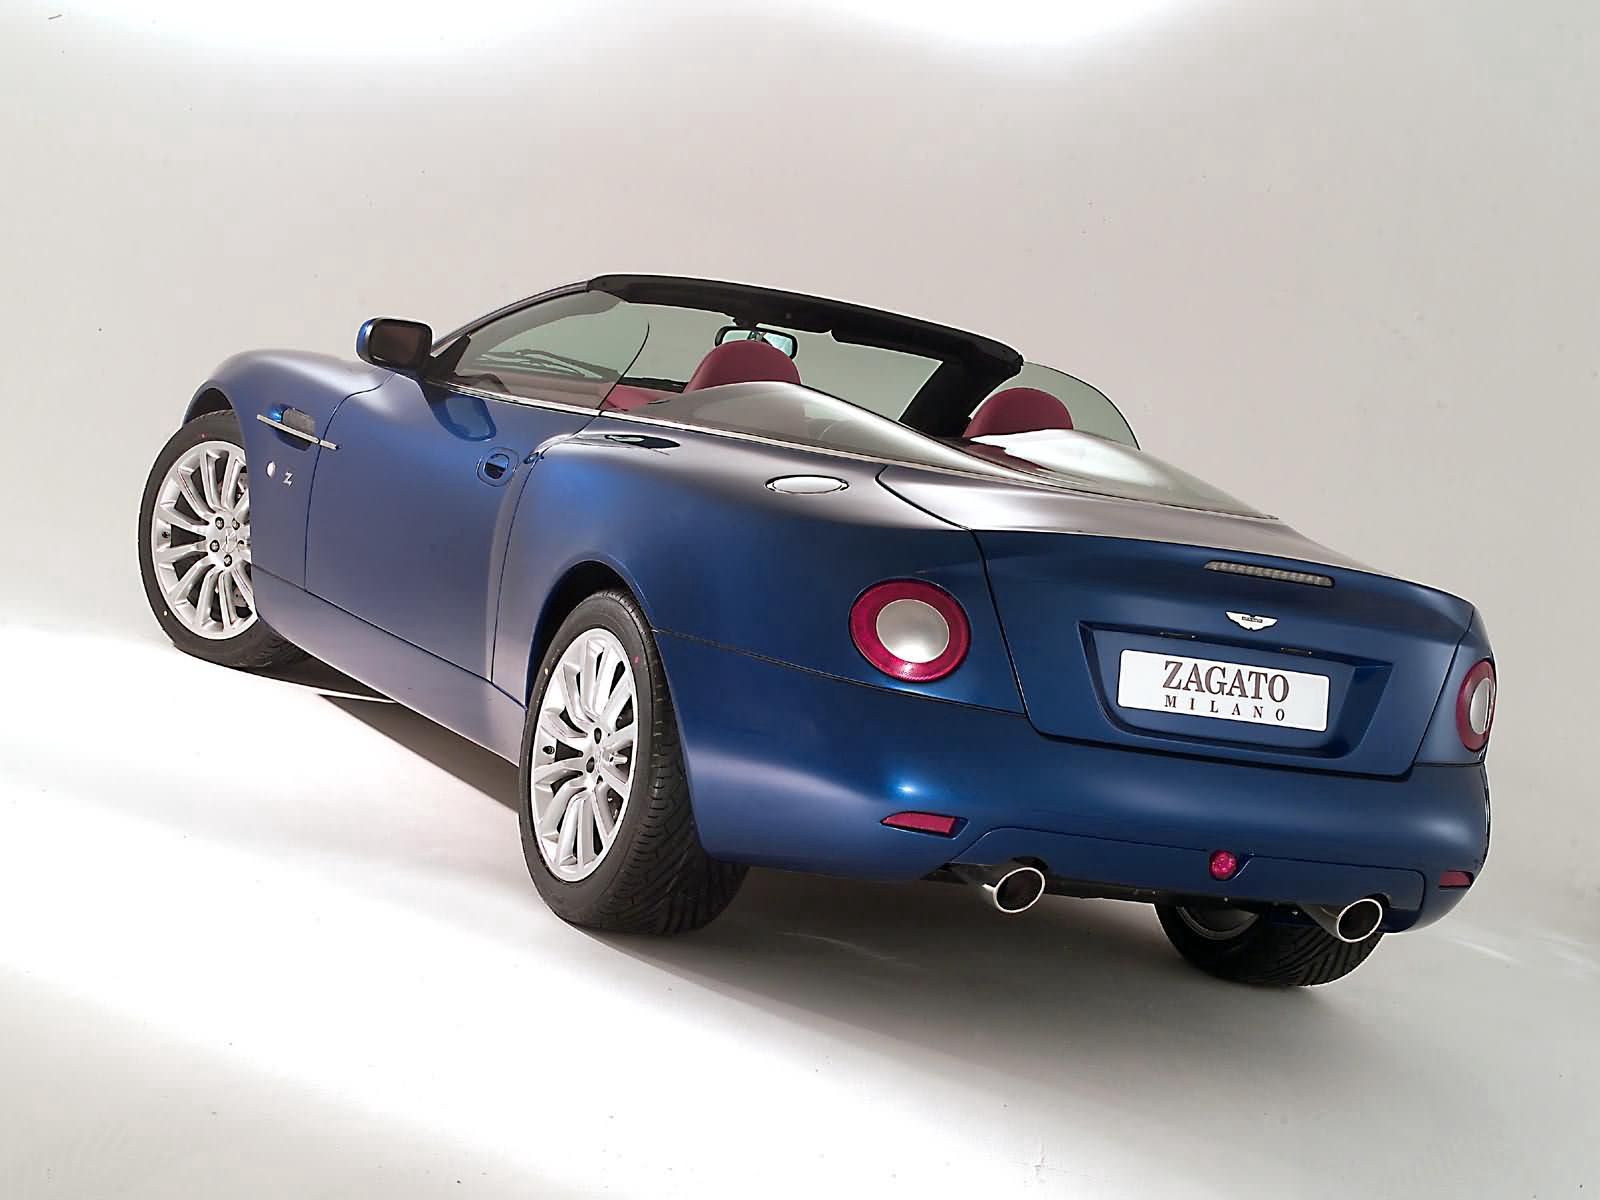 cars, auto, aston martin, blue, back view, rear view, style, cabriolet, 2004, v12, vanquish images